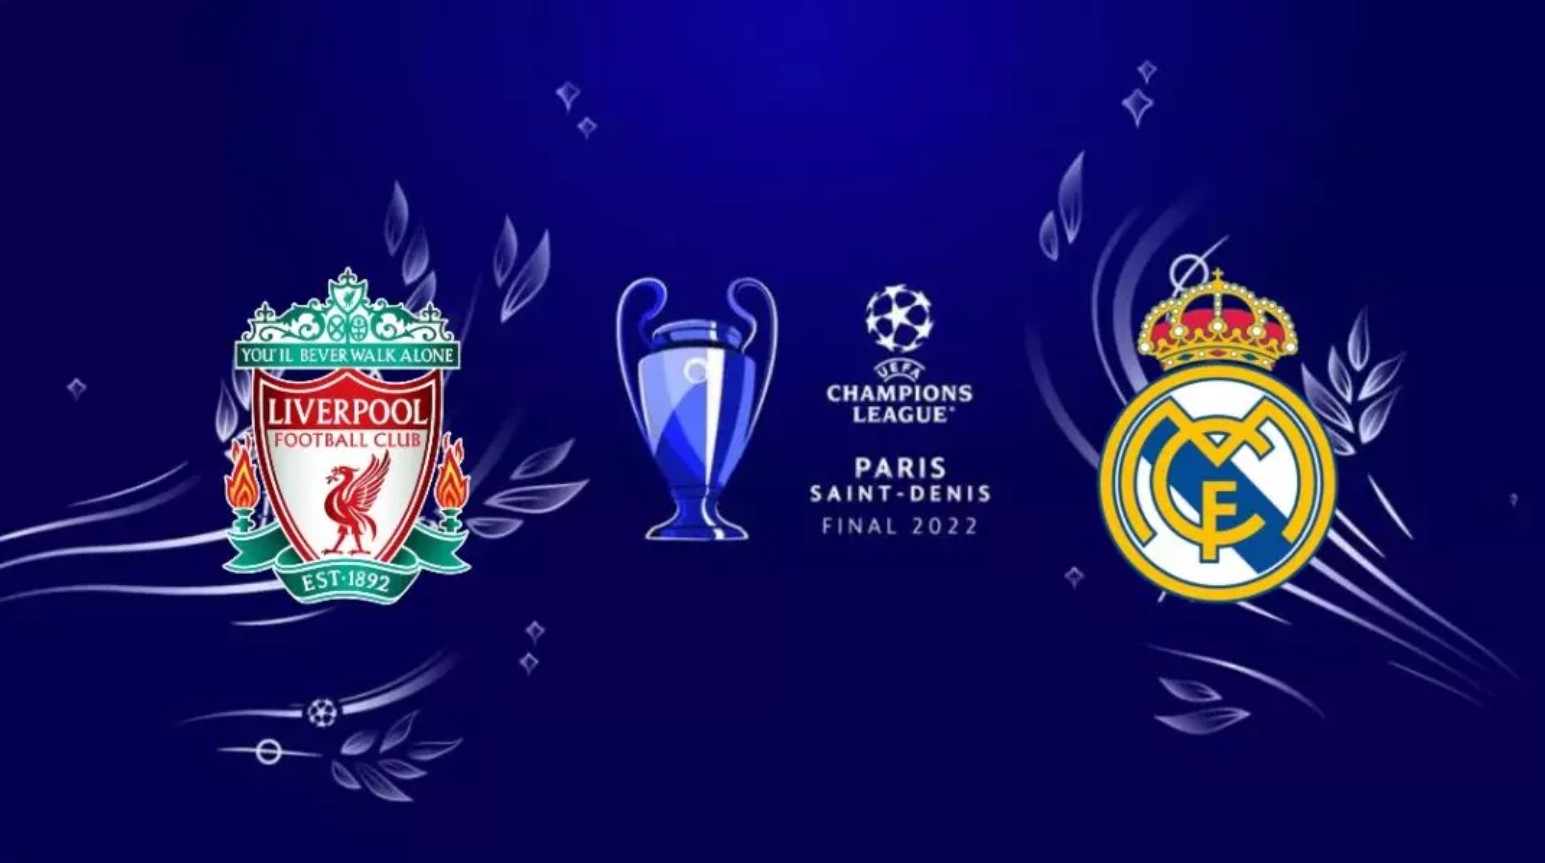 Schedule And Where To Watch The Liverpool-Real Madrid Champions League Final Online And For Free